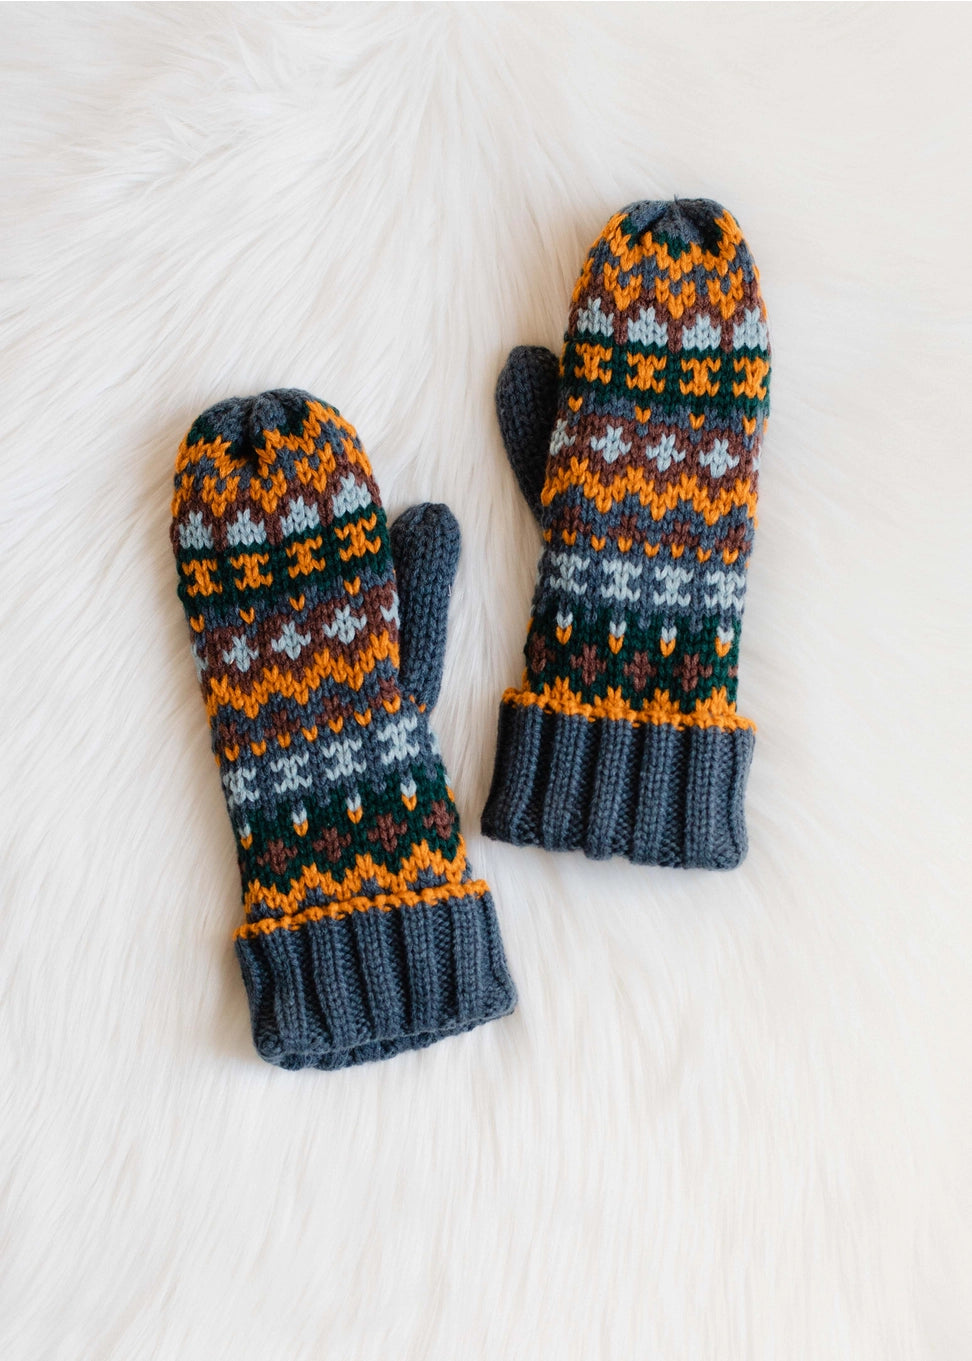 Dusty Blue & Multicolored Patterned Mittens